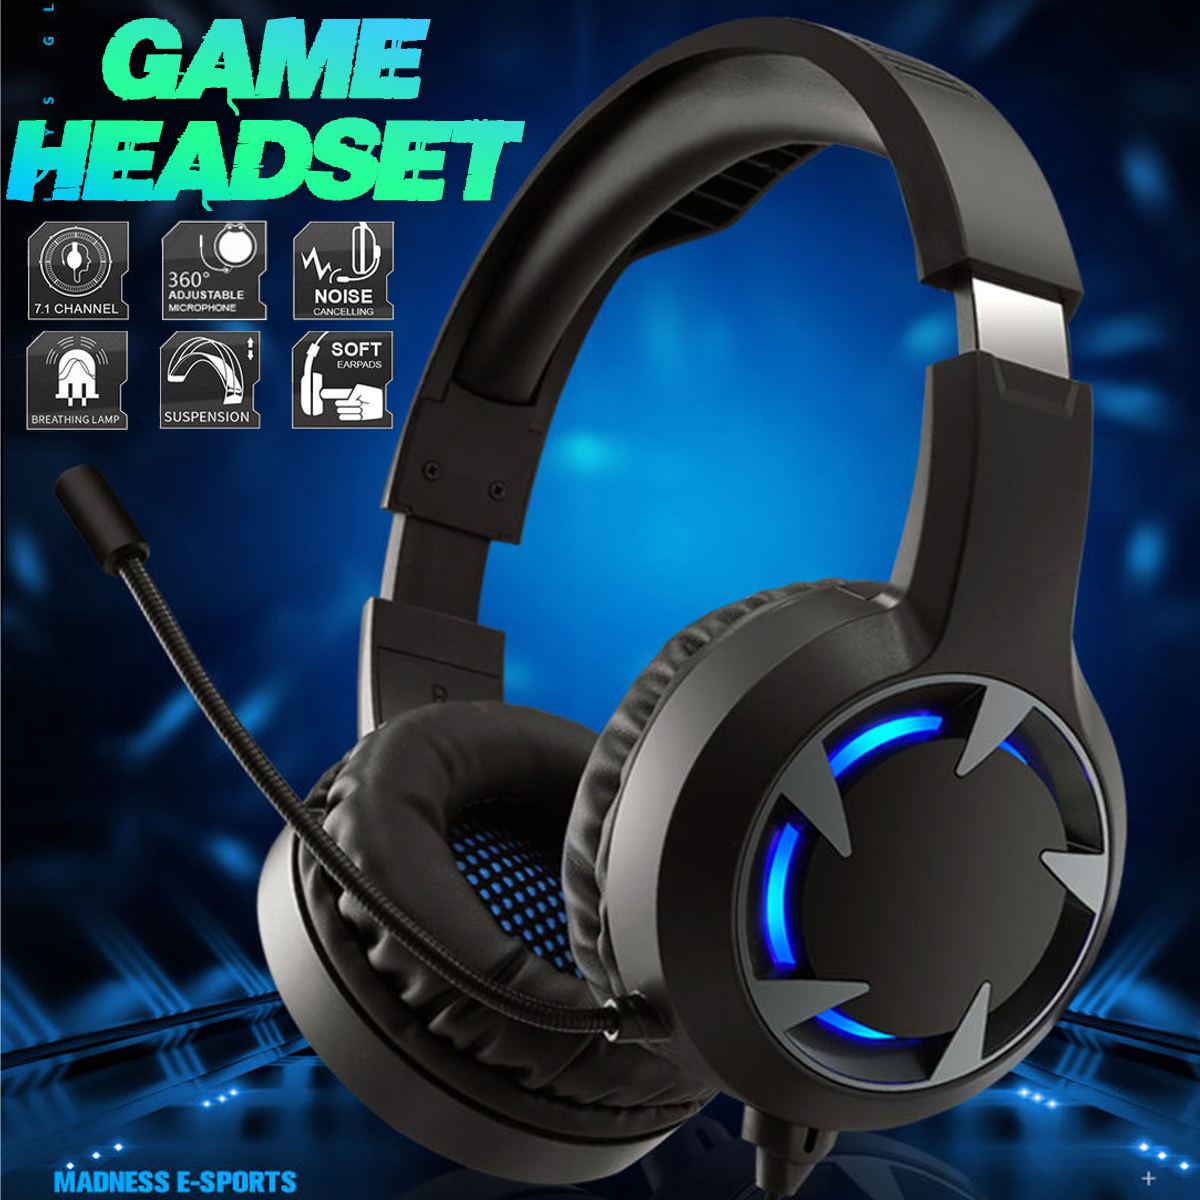 Bakeey Wired Headphones Stereo Bass Surround Gaming Headset for PS4 New for Xbox One PC with Mic